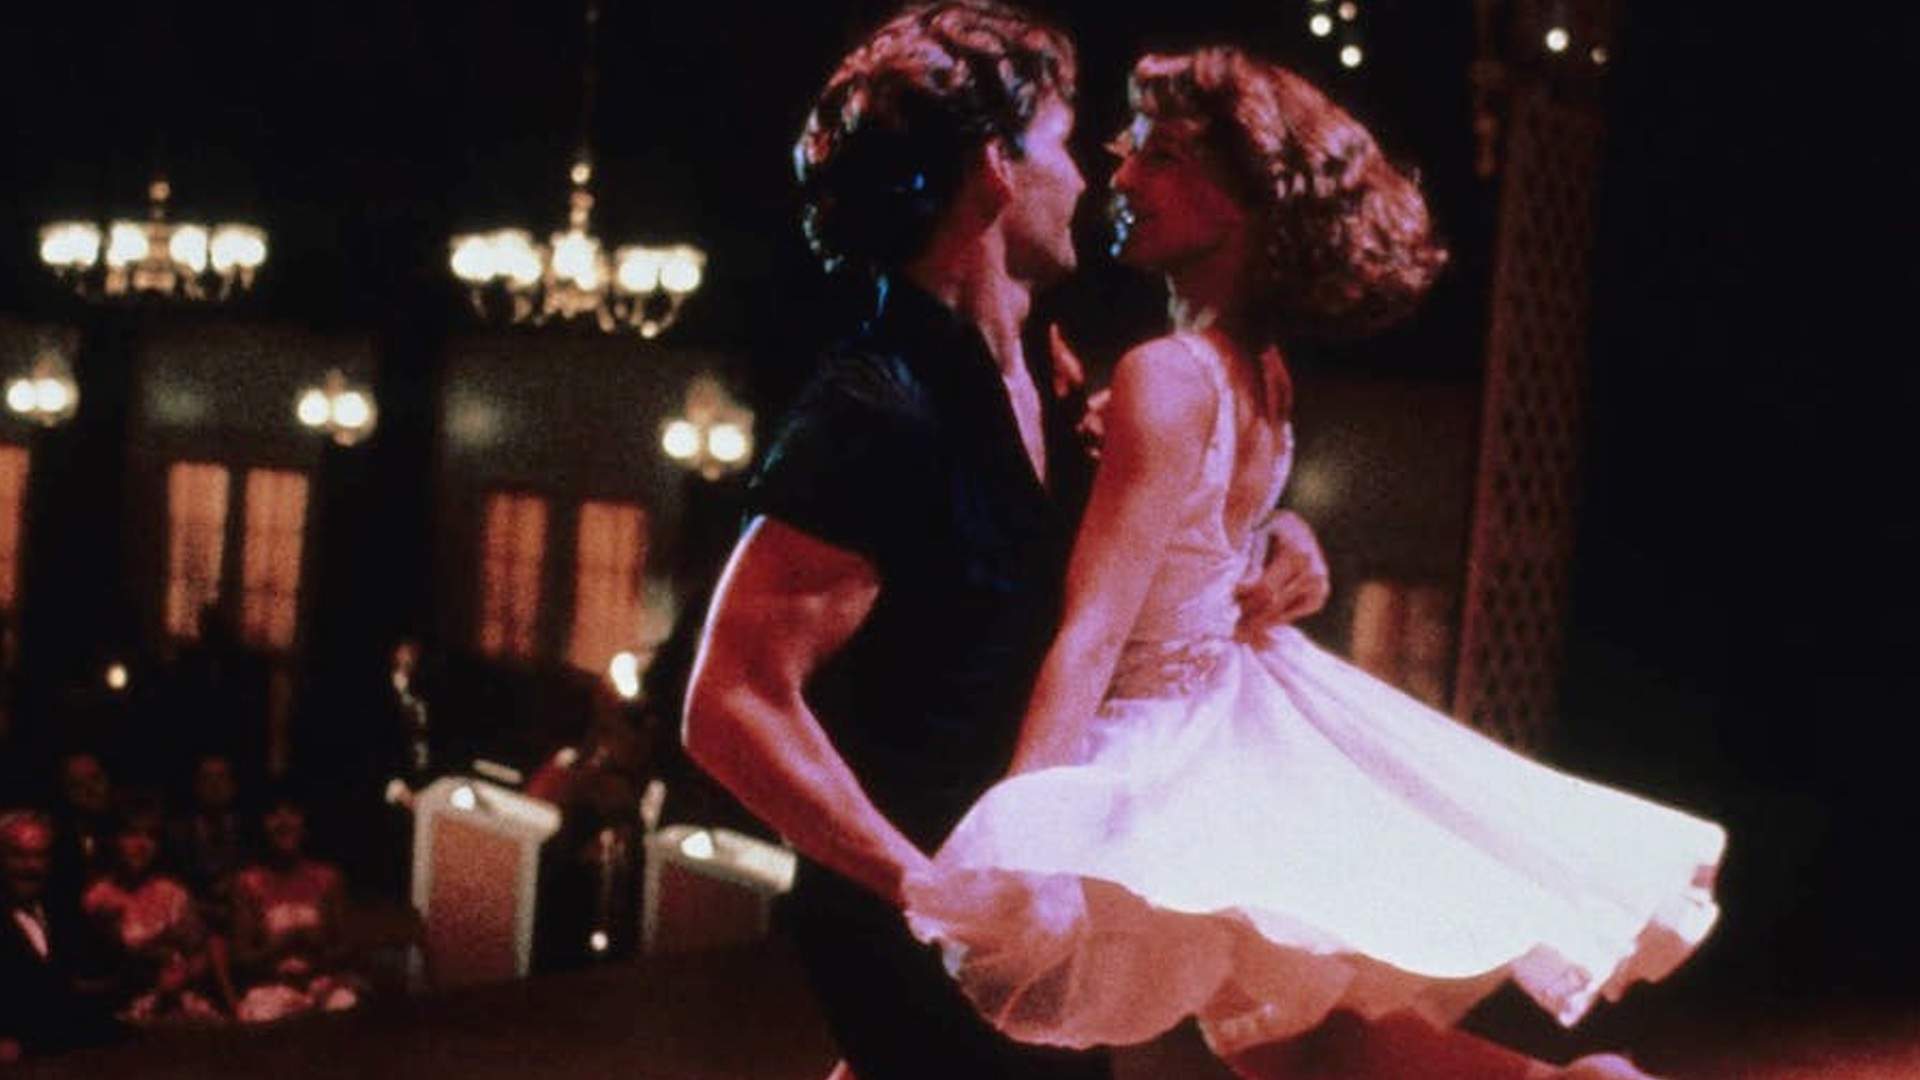 DIRTY DANCING: THE IMMERSIVE CINEMA EXPERIENCE